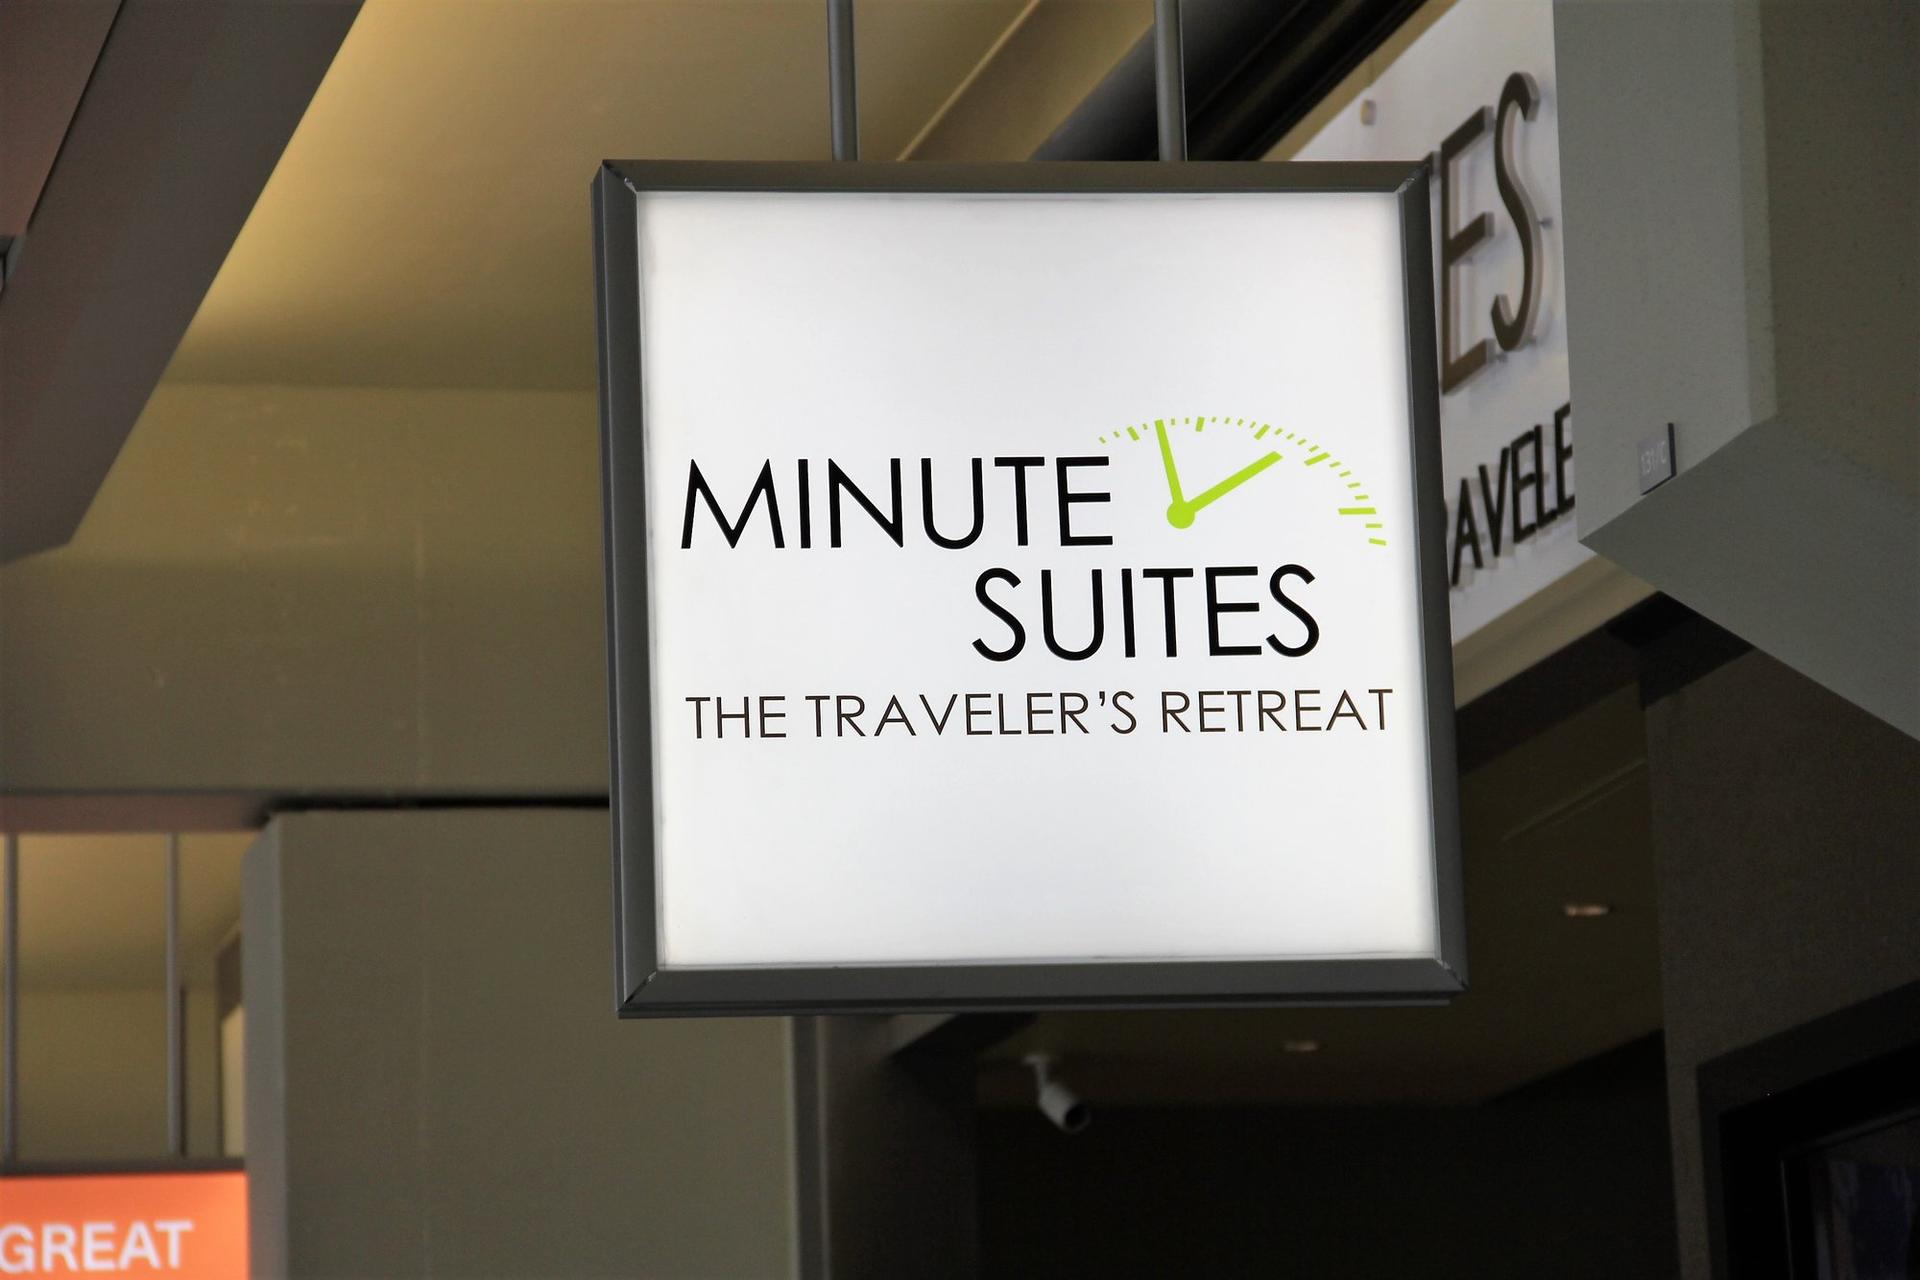 Minute Suites image 47 of 47